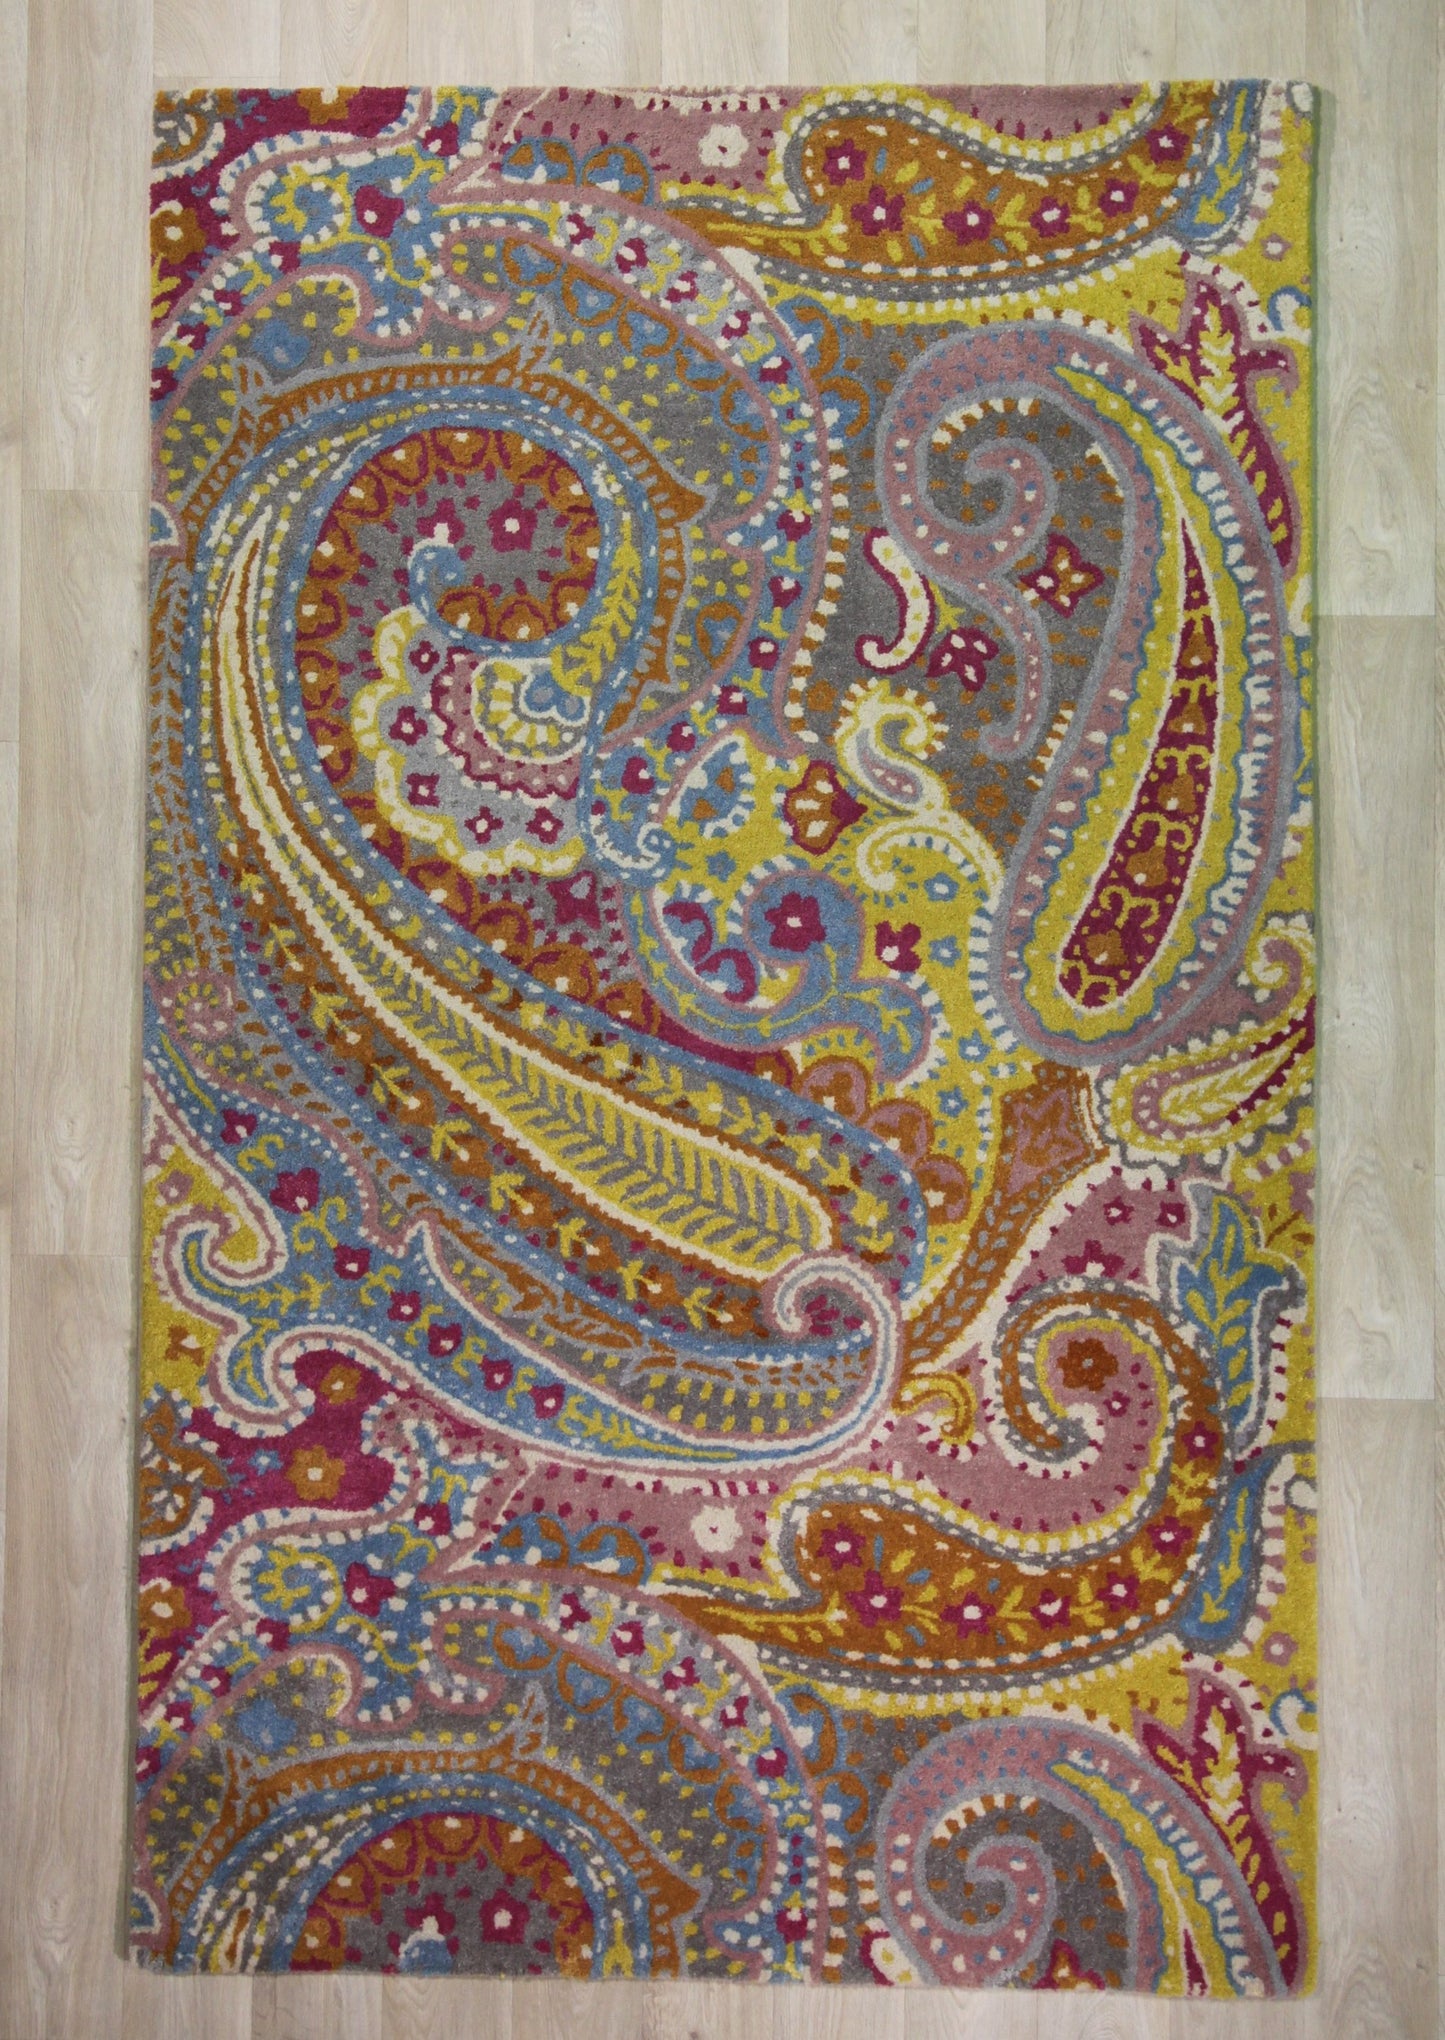 Colorful paisley rug - Tufted wool